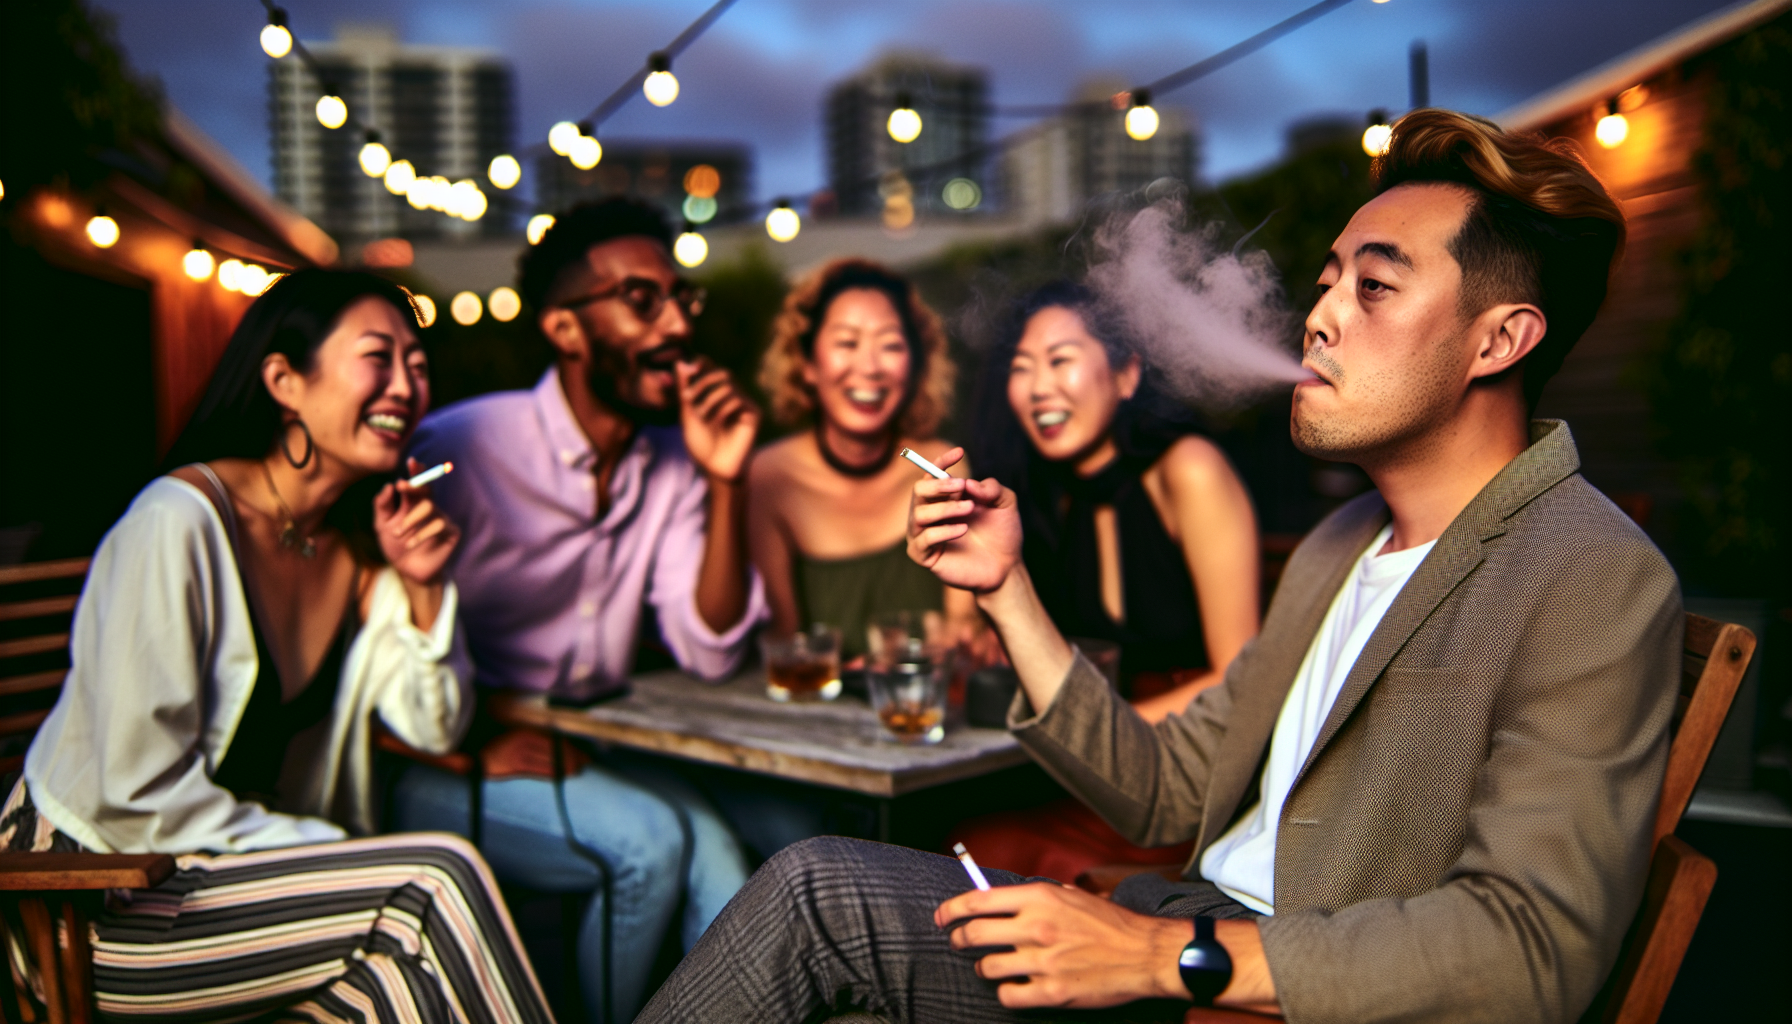 A group of people sitting together, with one person smoking a cigarette